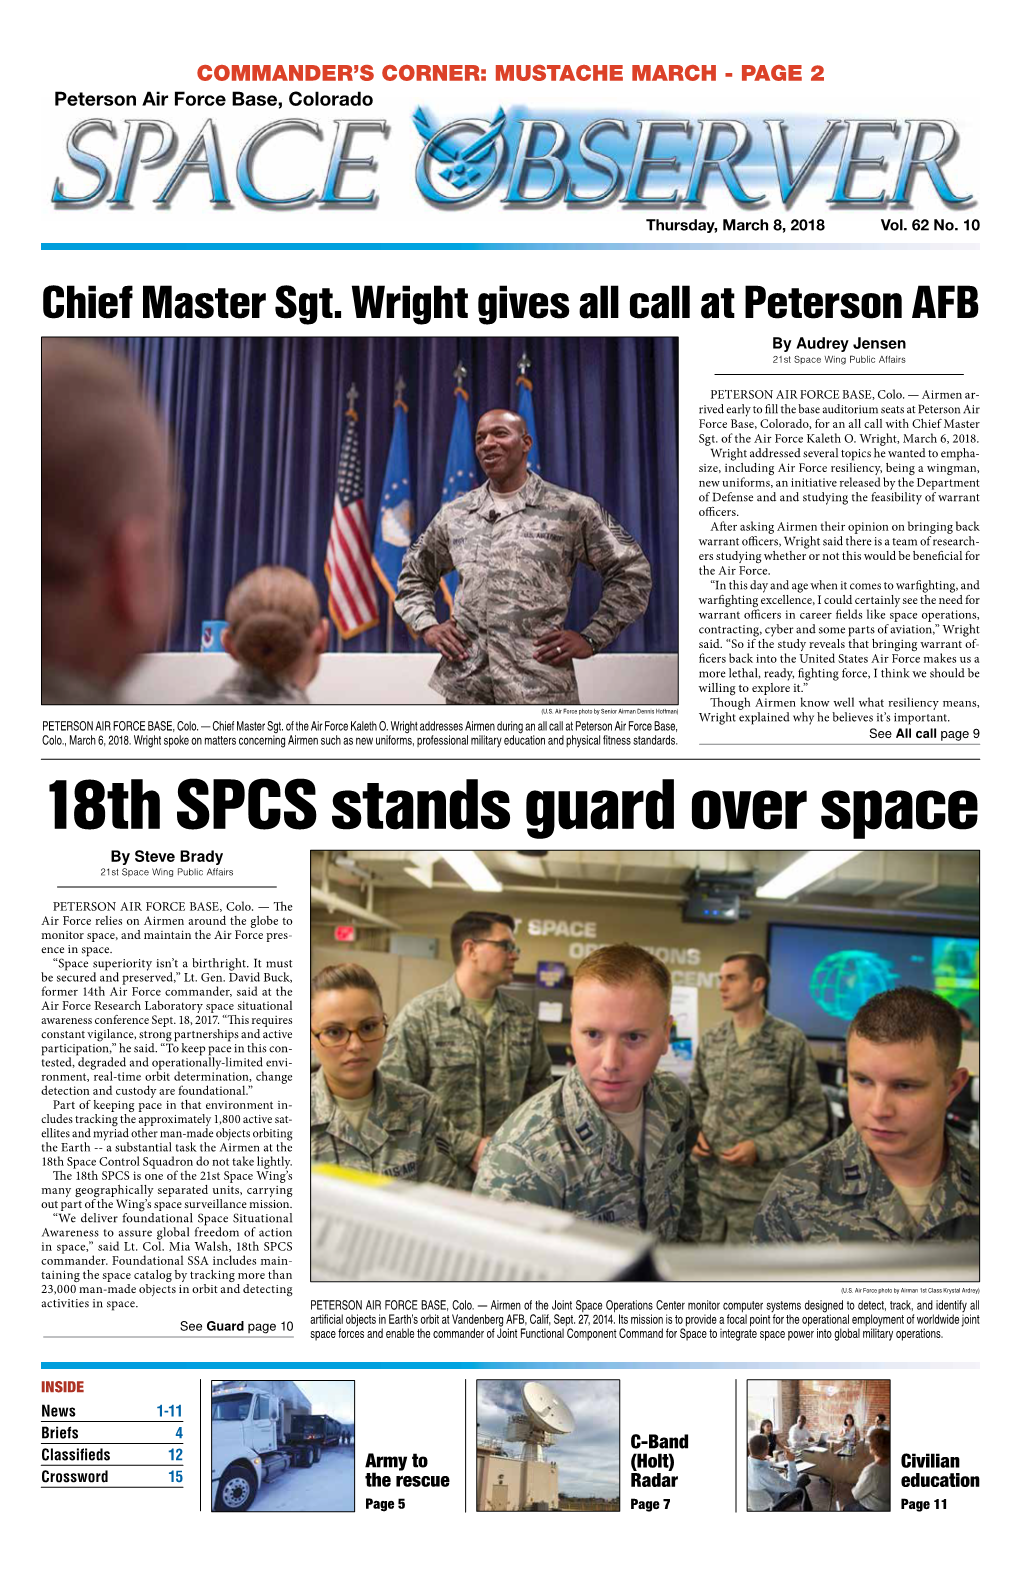 18Th SPCS Stands Guard Over Space by Steve Brady 21St Space Wing Public Affairs